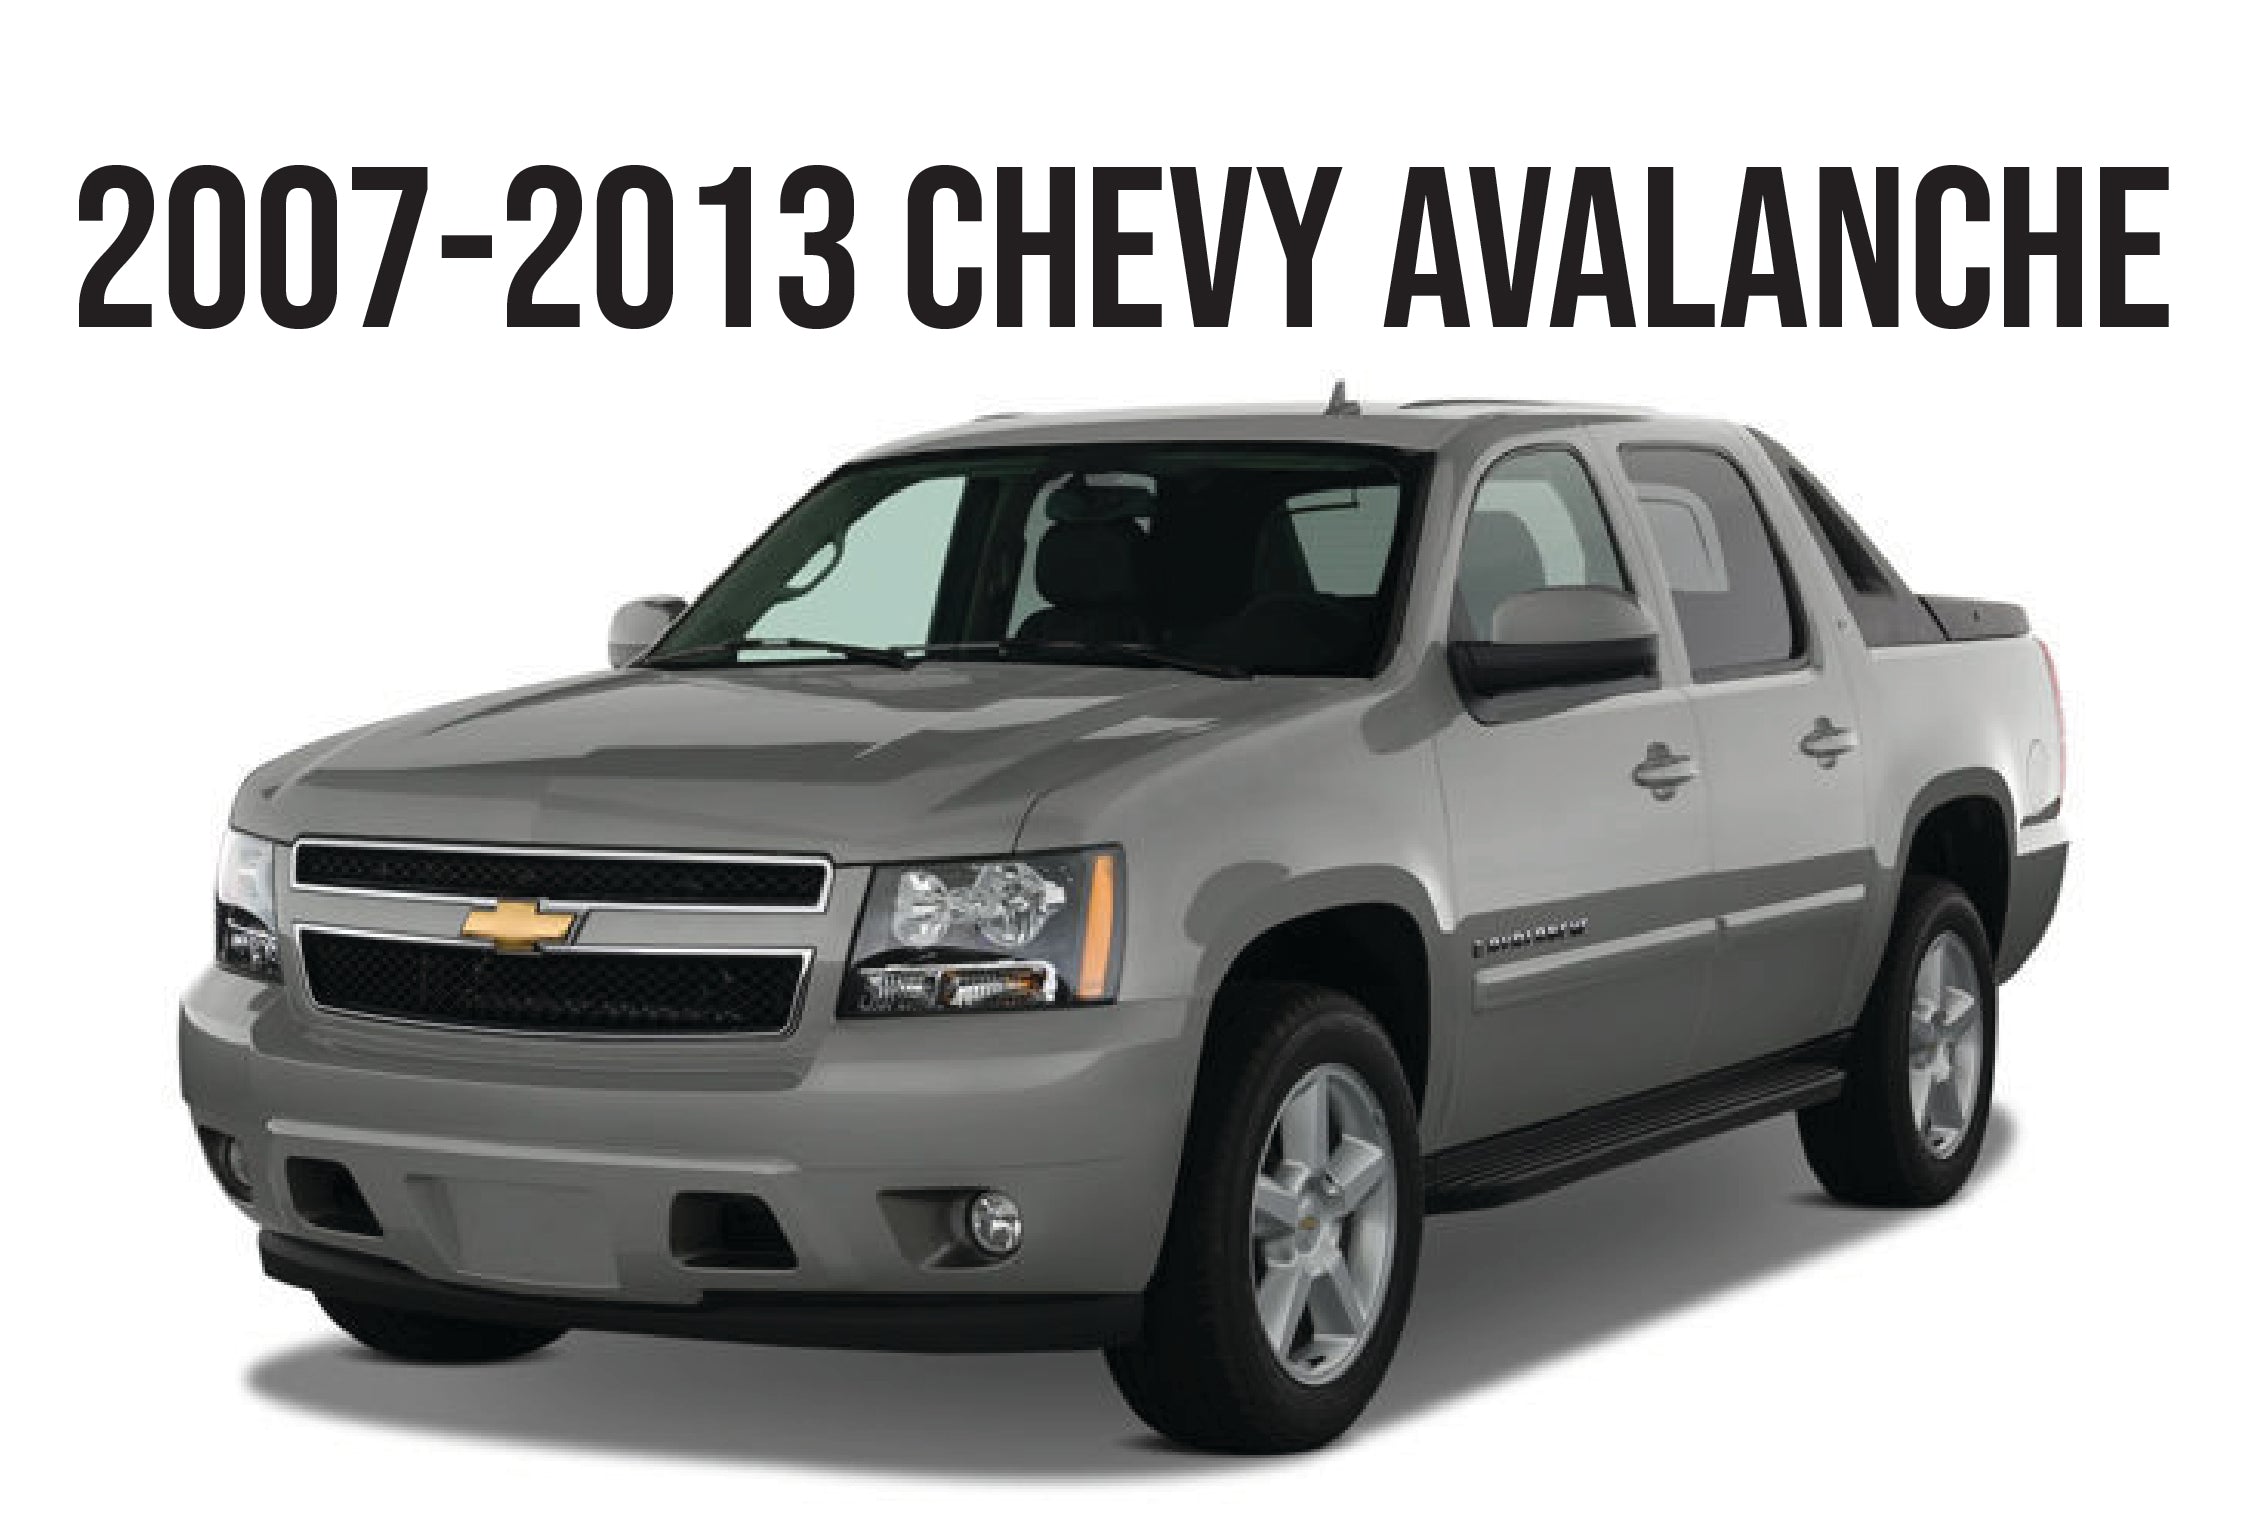 2007-2013 CHEVY AVALANCHE